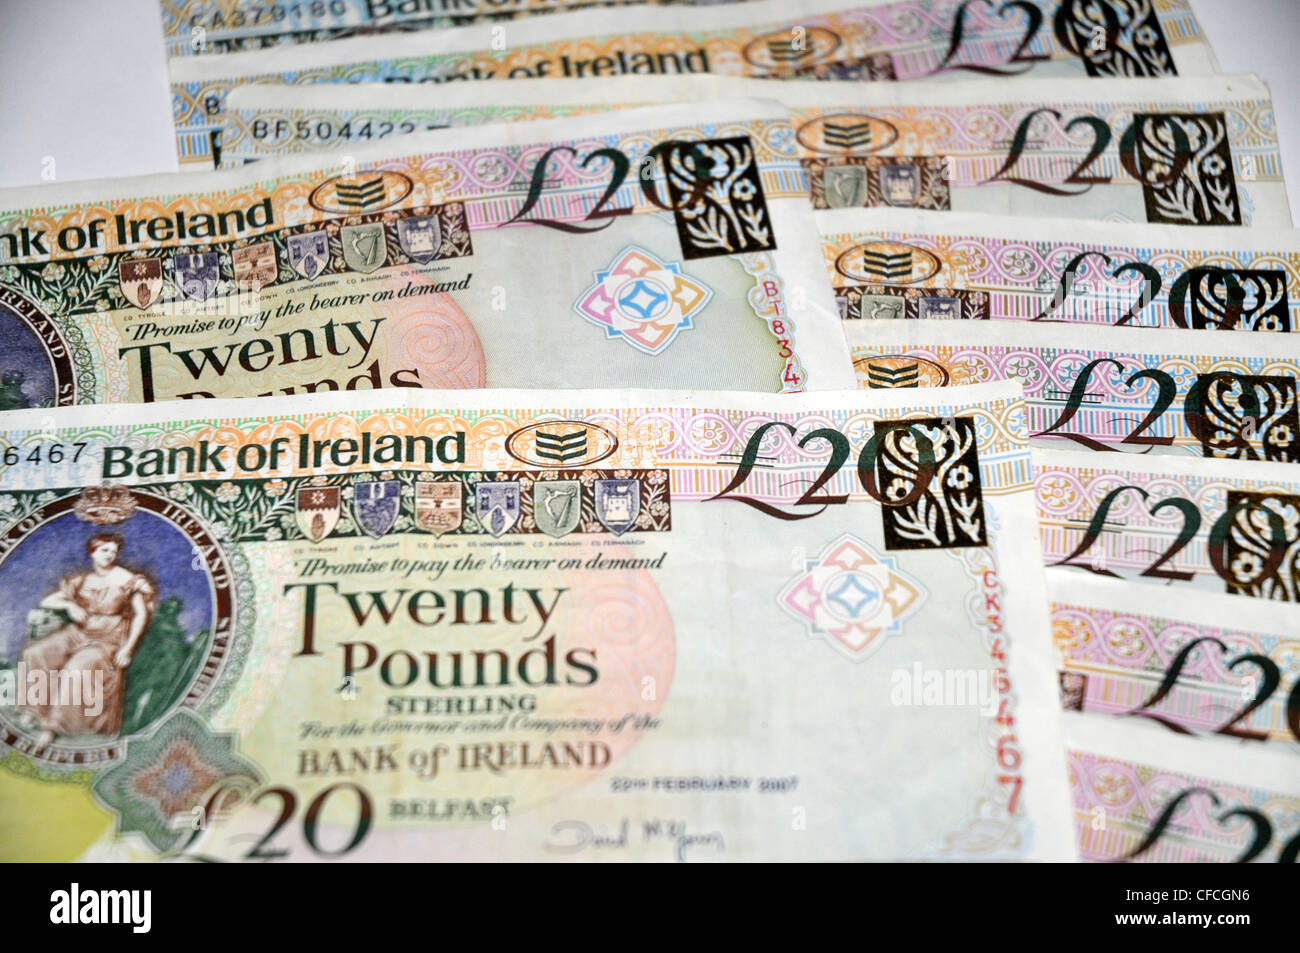 Bank of Ireland £20 notes. Issued by the Bank of Ireland in Belfast, Northern Ireland. Stock Photo